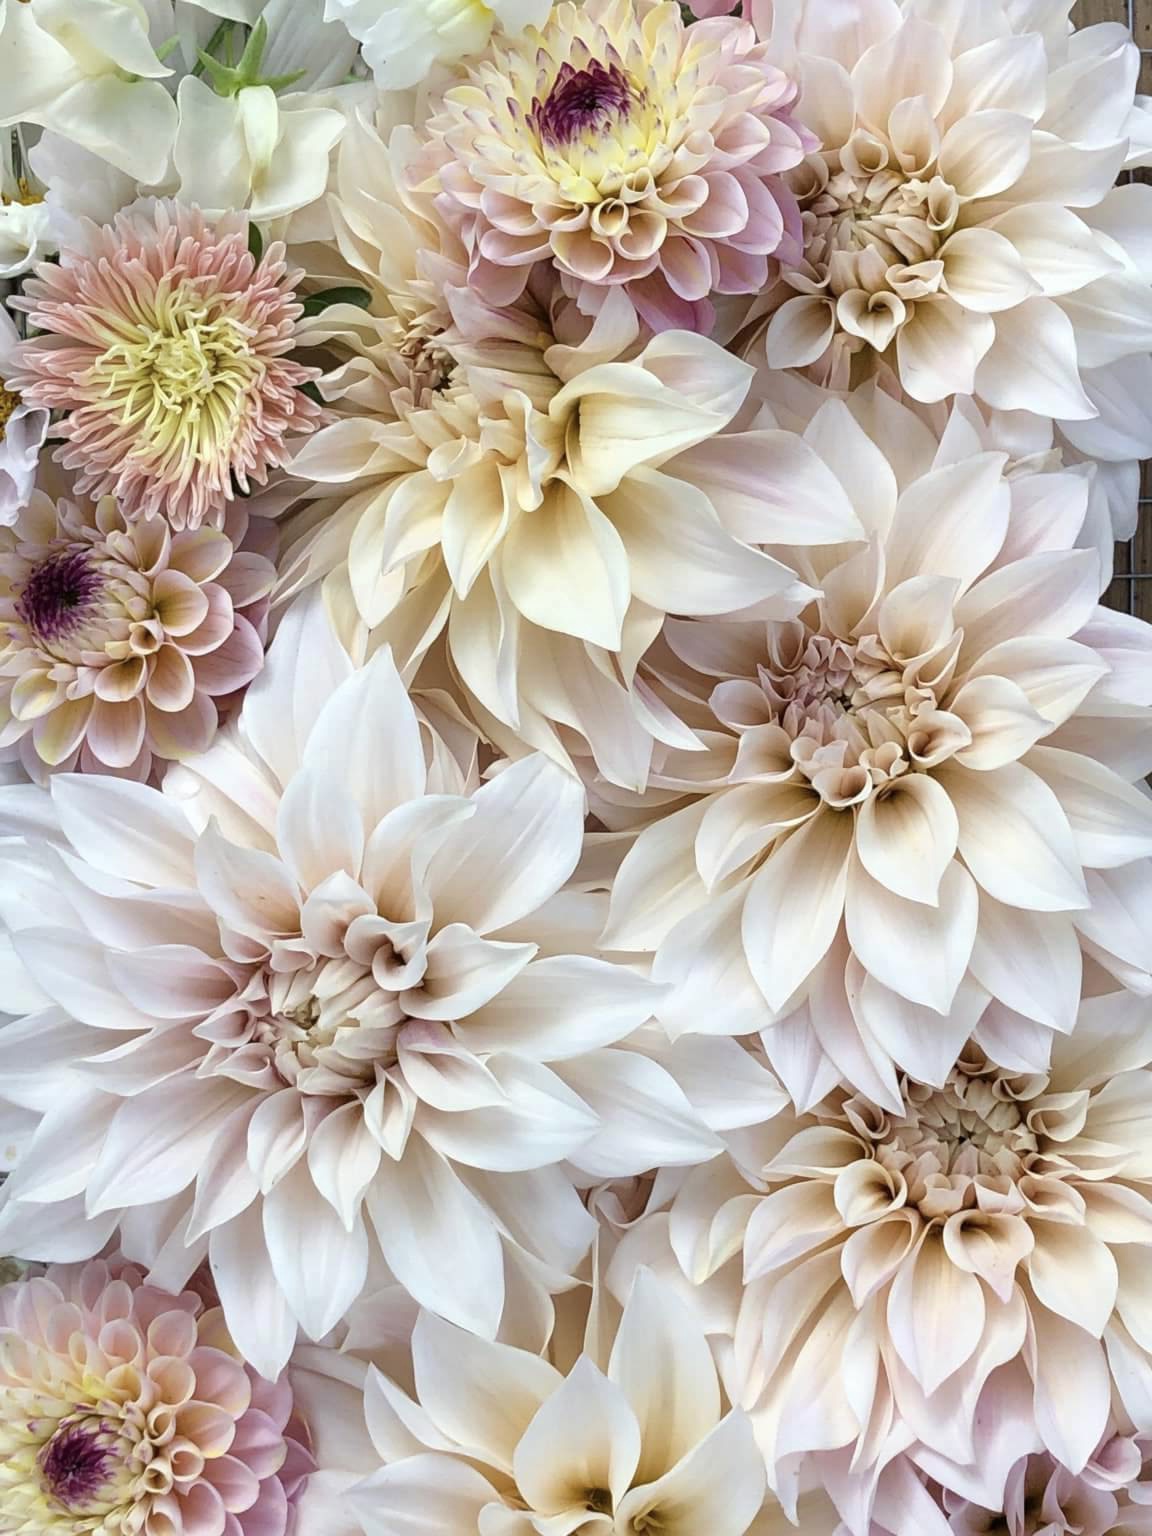 Cafe au lait Dahlias and cut flowers in pale pinks and blush tones from productive garden 